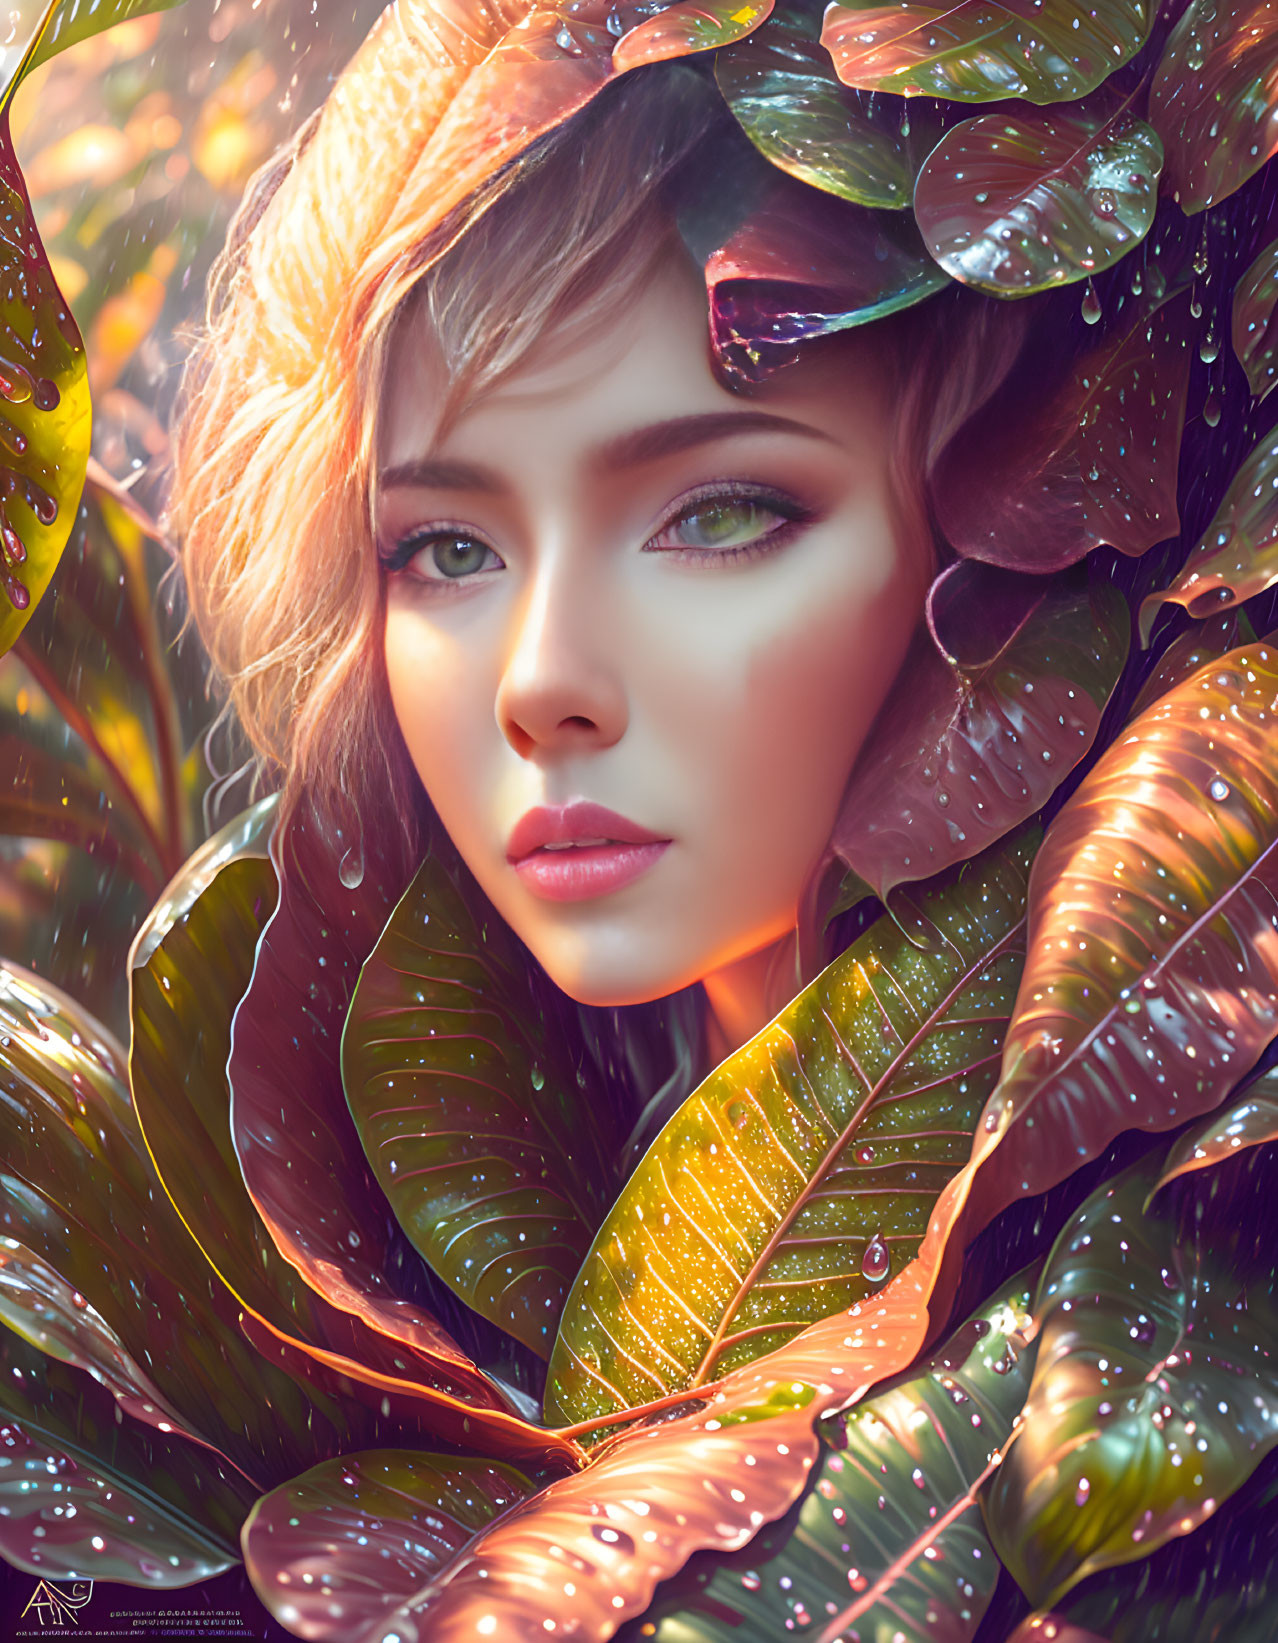 Colorful Foliage Digital Artwork: Woman's Face with Water Droplets